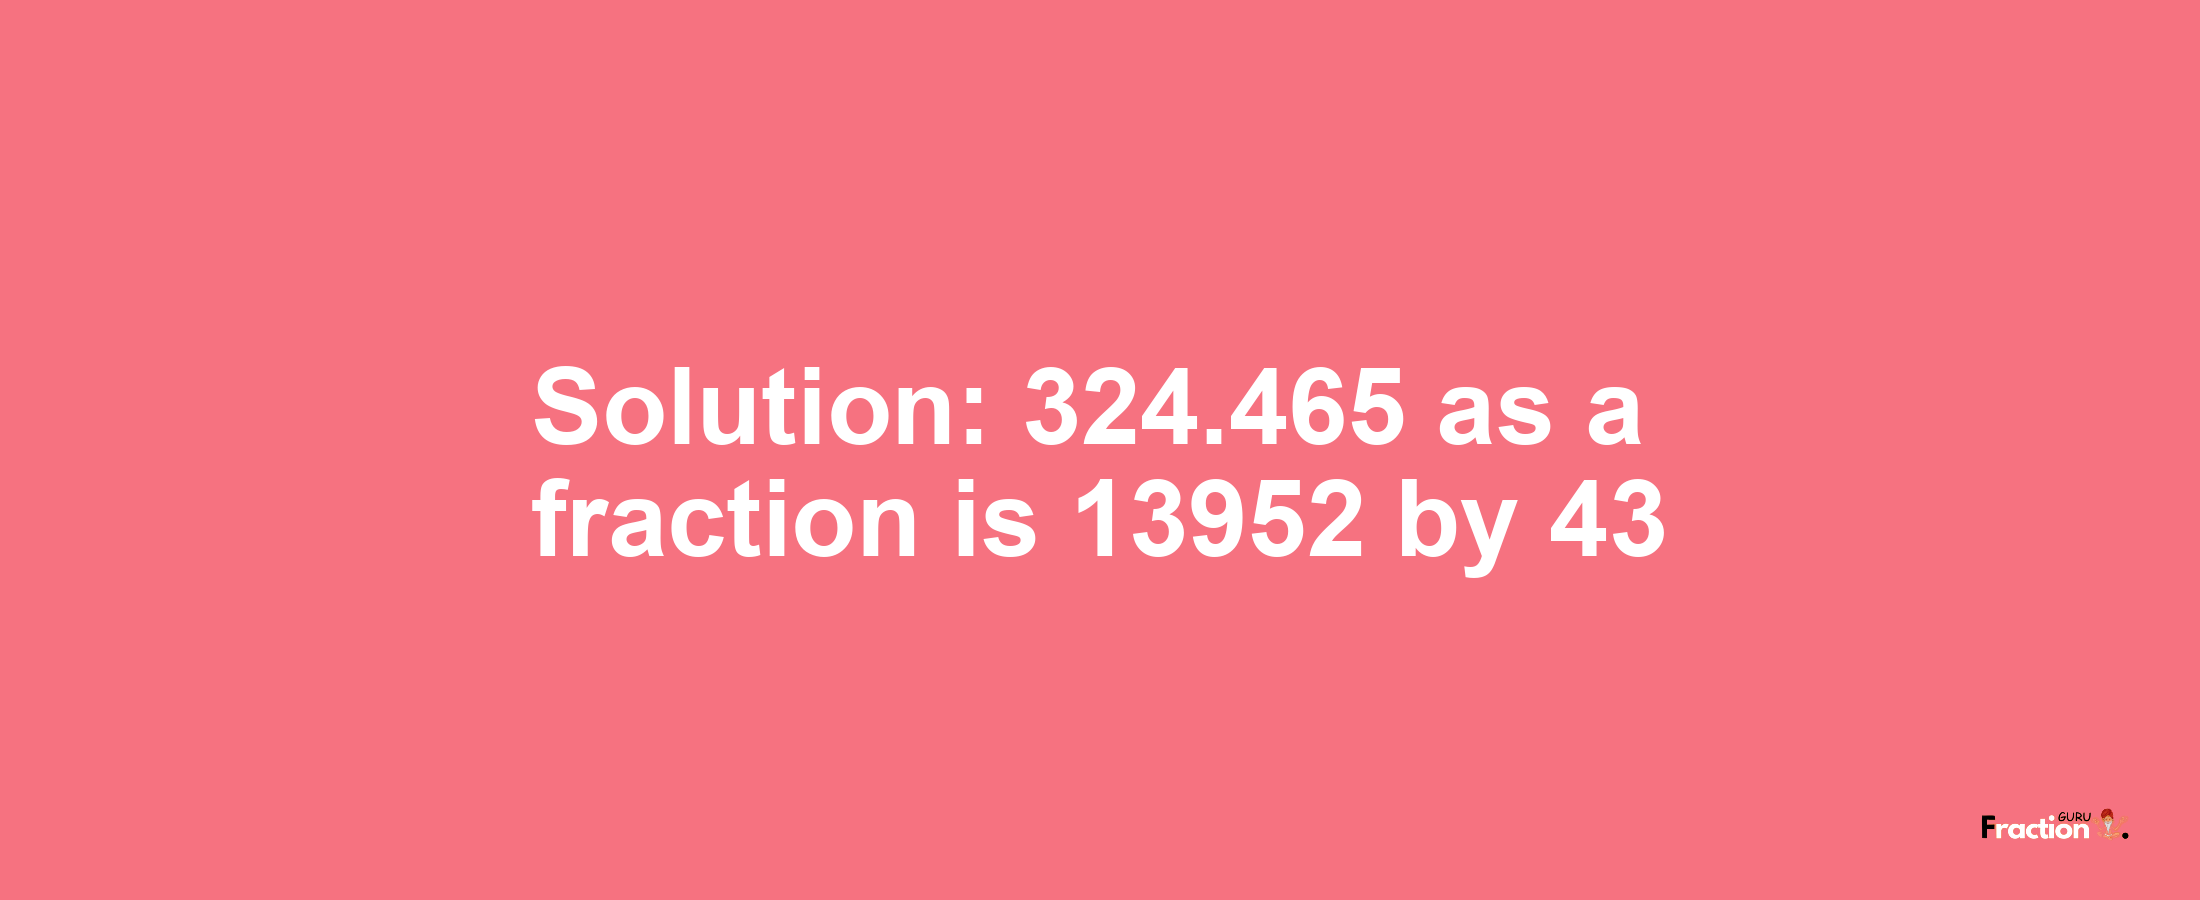 Solution:324.465 as a fraction is 13952/43